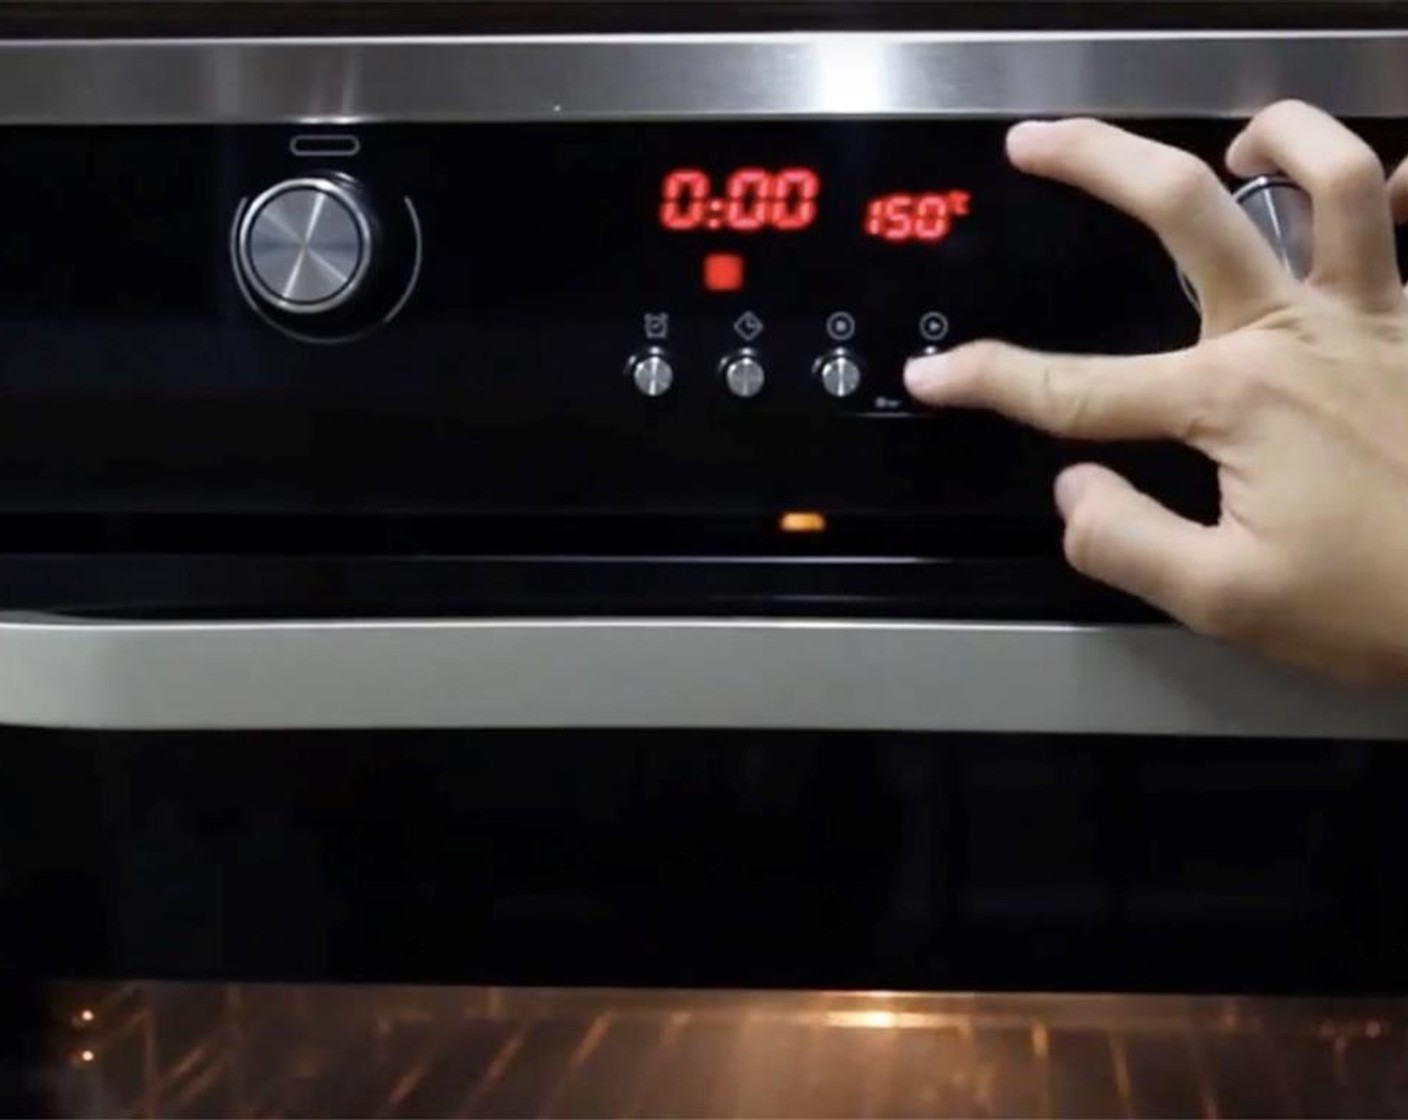 step 1 Preheat the oven to 350 degrees F (180 degrees C) or 300 degrees F (150 degrees C) if you have a fan oven.